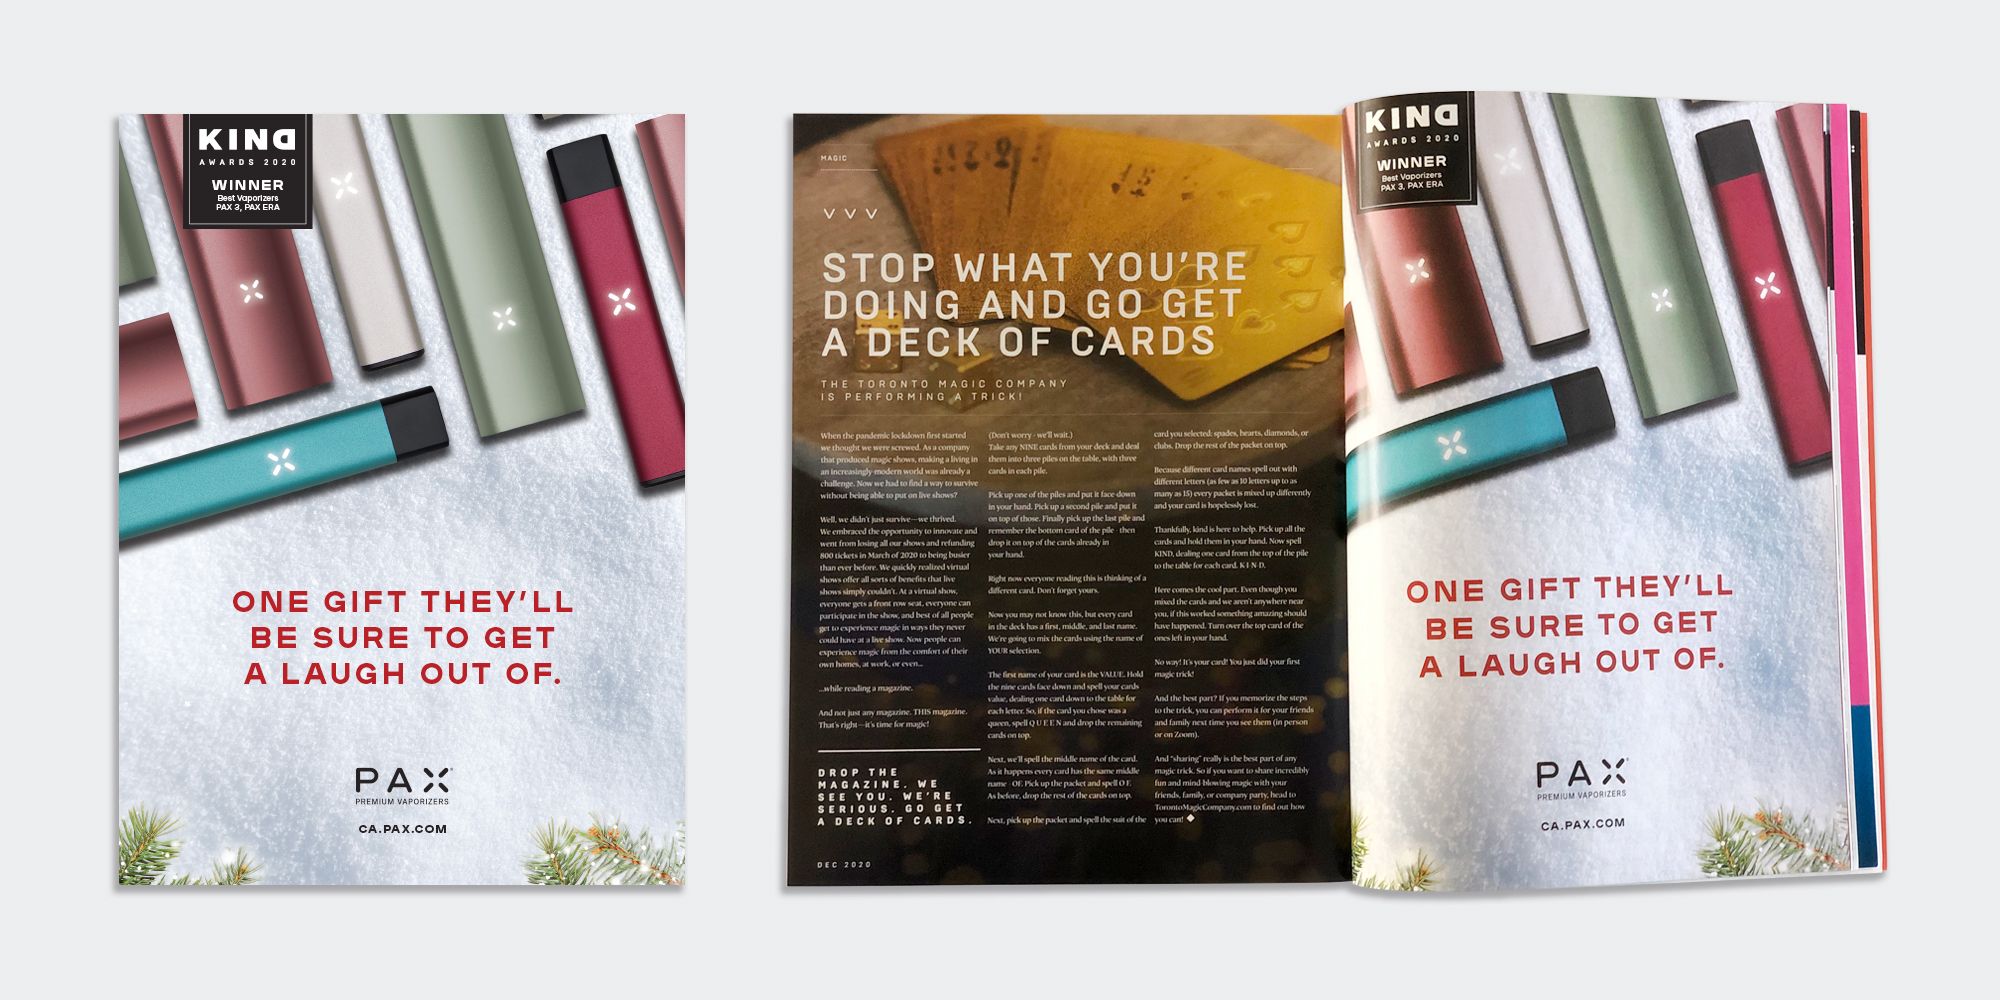 Kind magazine fold out to full page PAX holiday campaign advertisement.